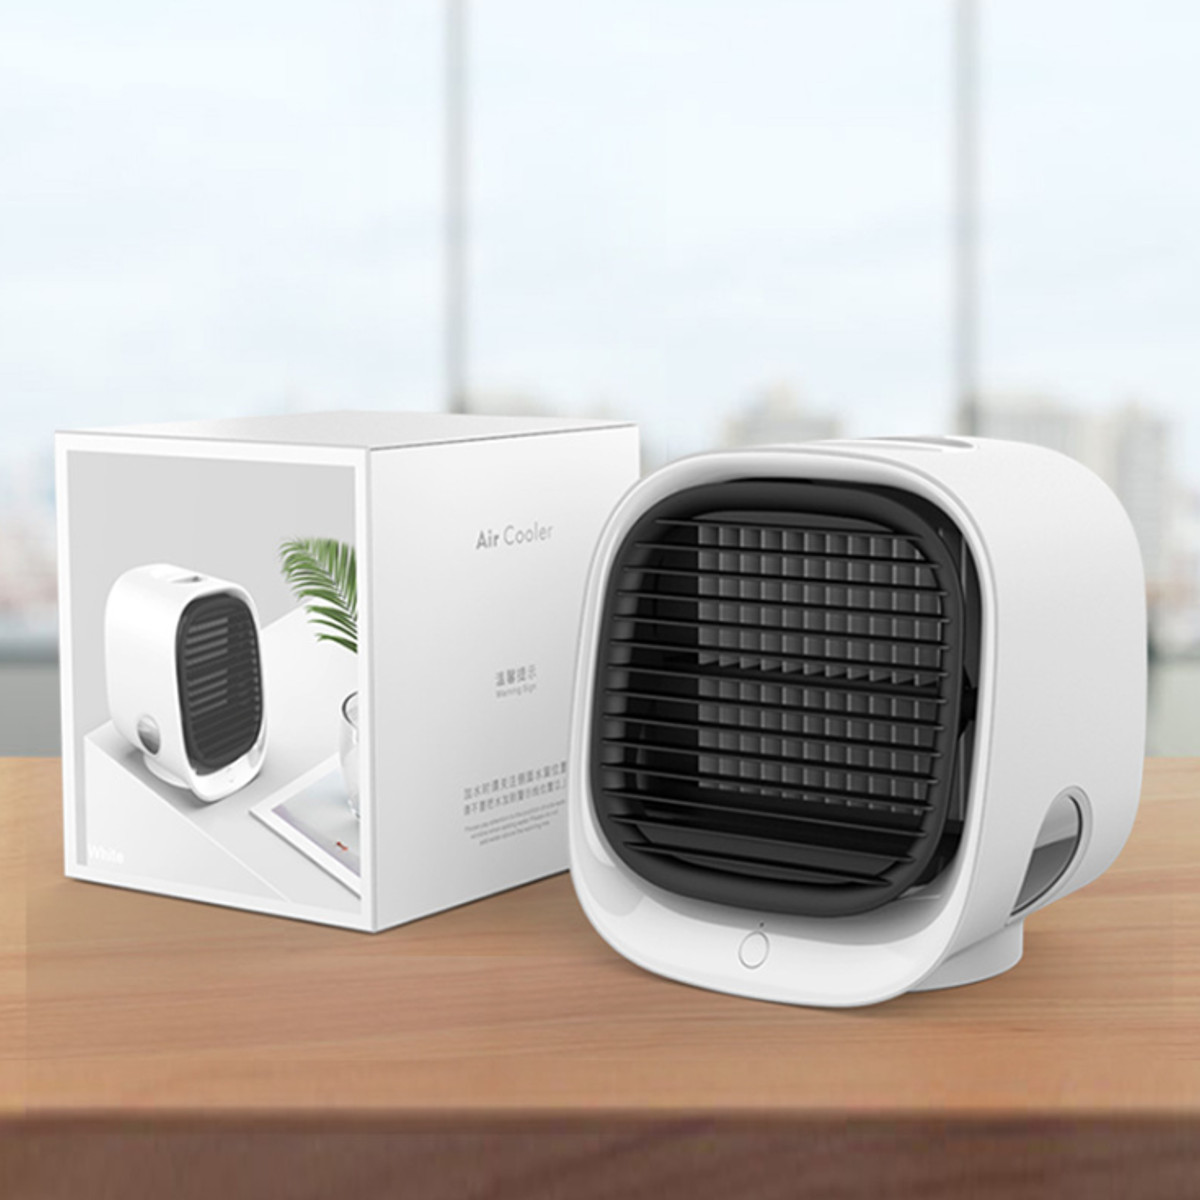 Mini Portable Air Conditioner Conditioning Humidifier Purifier USB 7 Colors Light Desktop Air Cooler Fan With Water Tanks